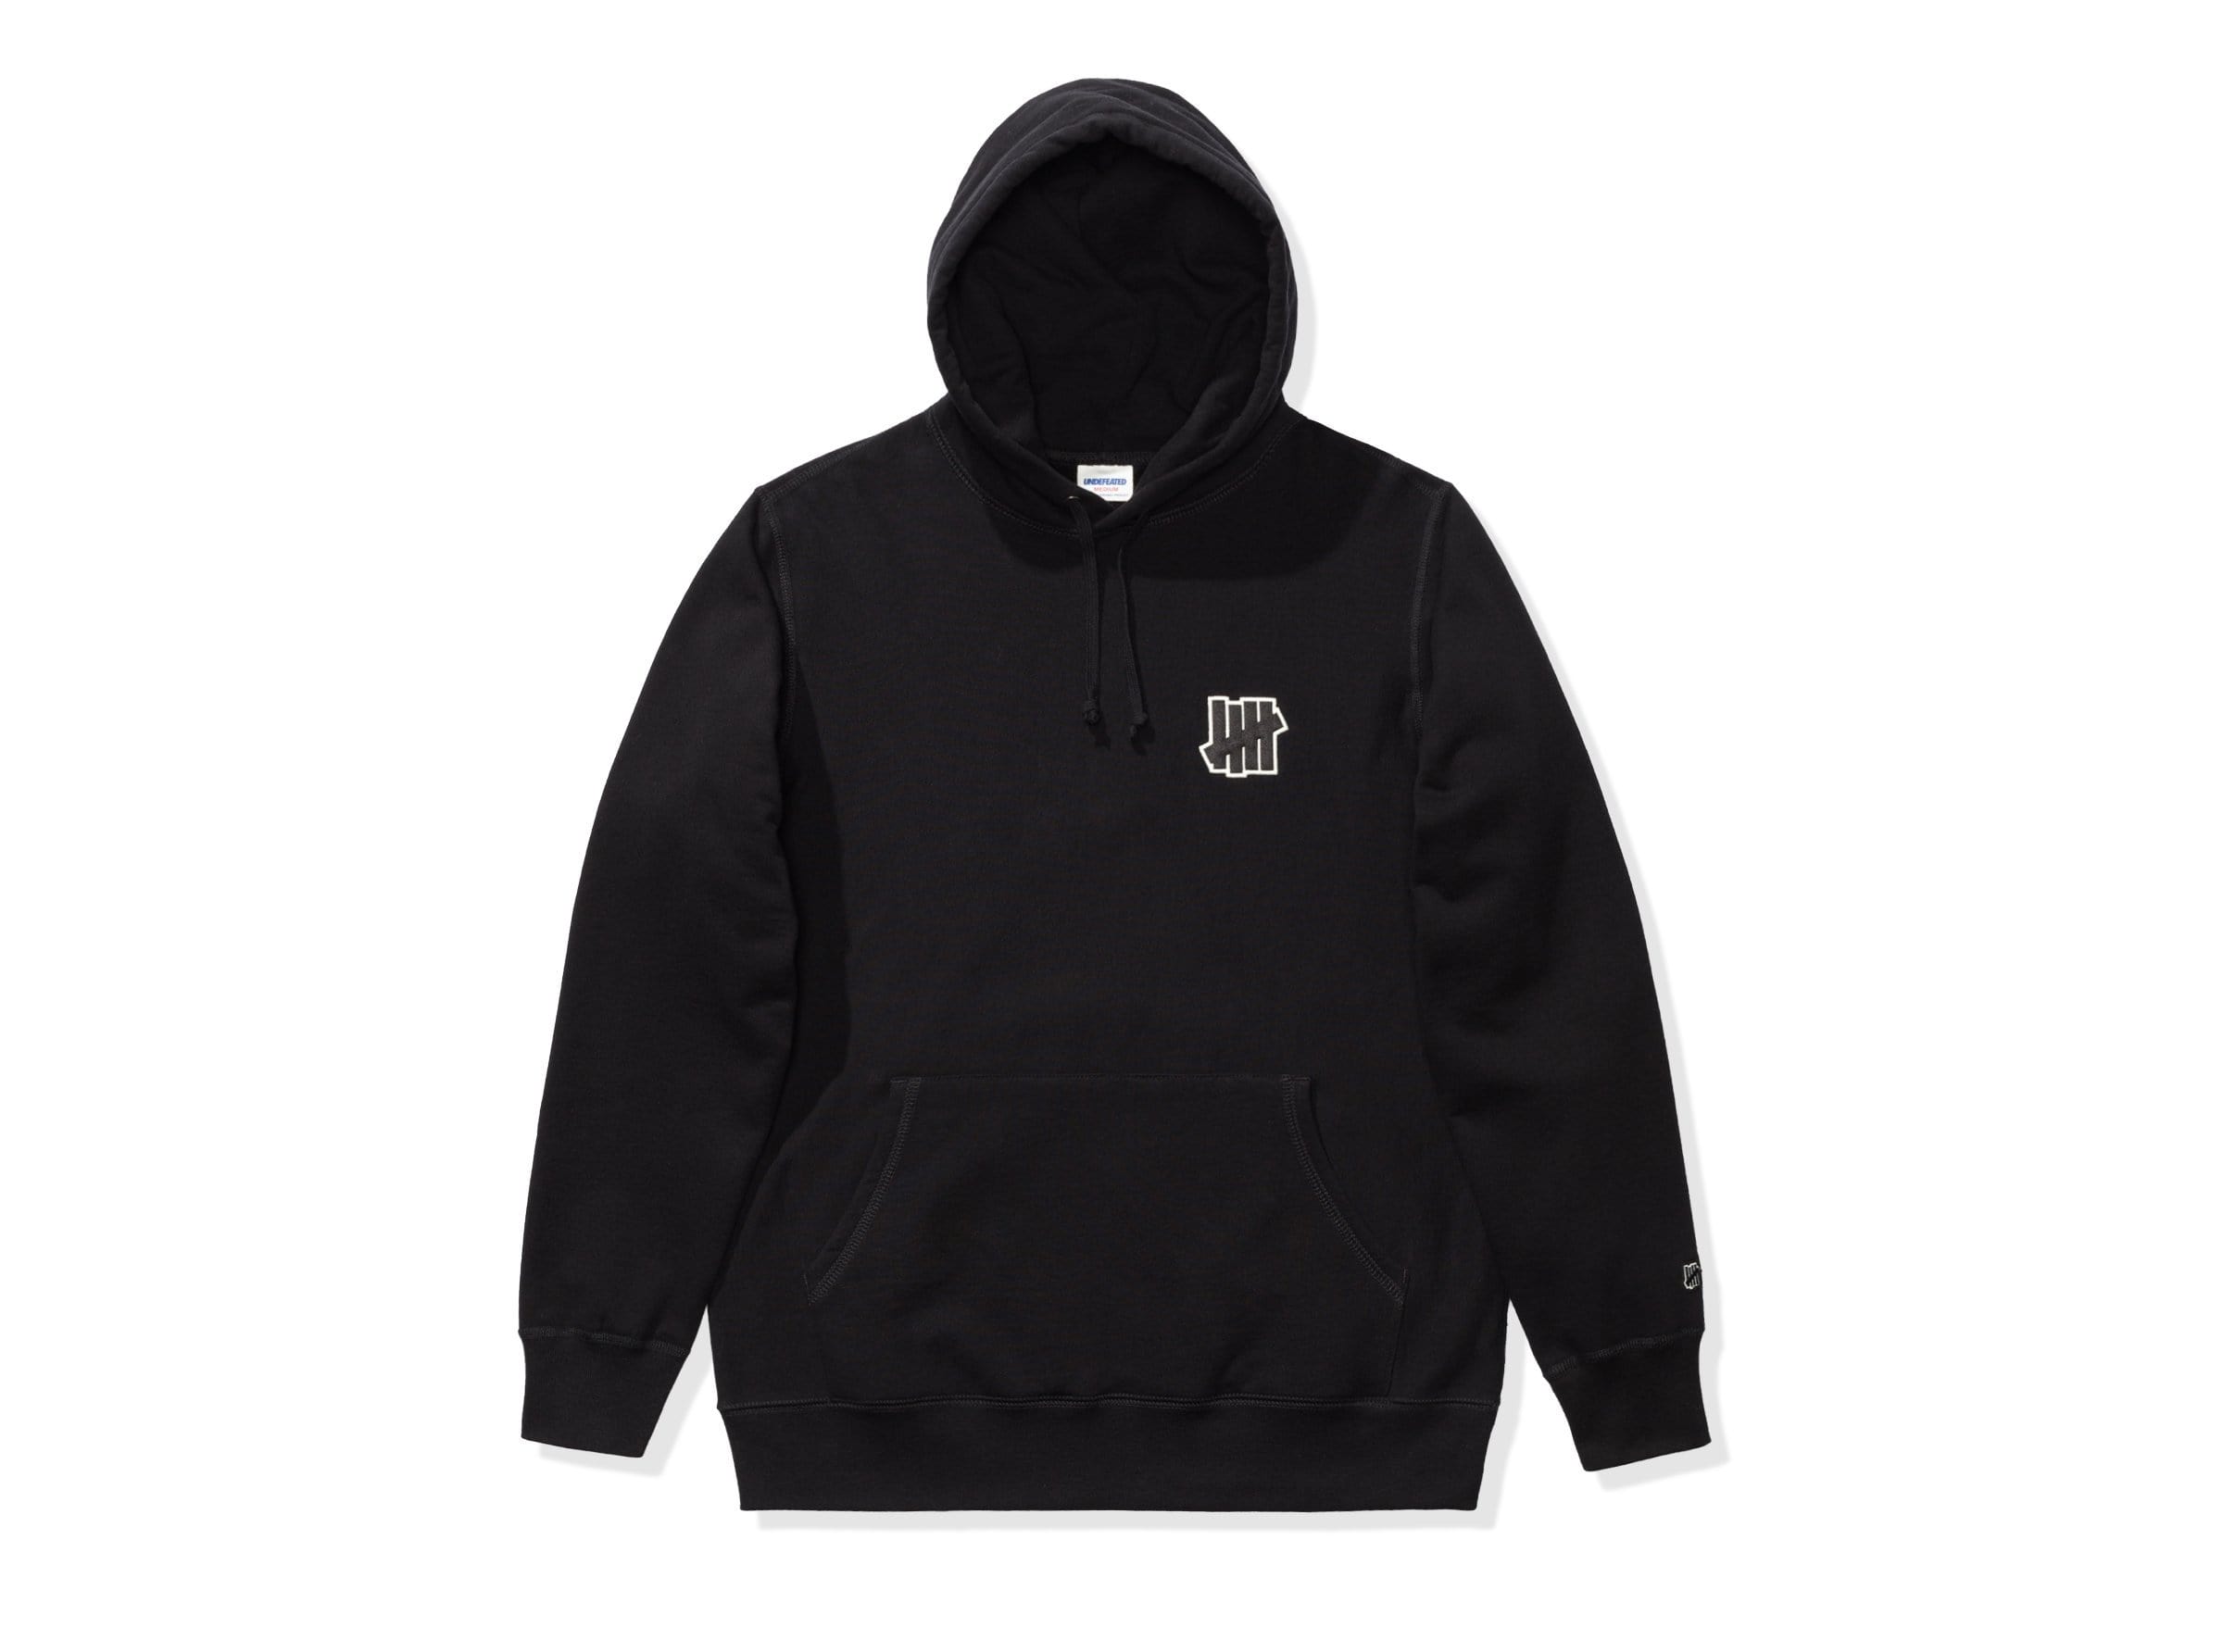 undefeated champion hoodie